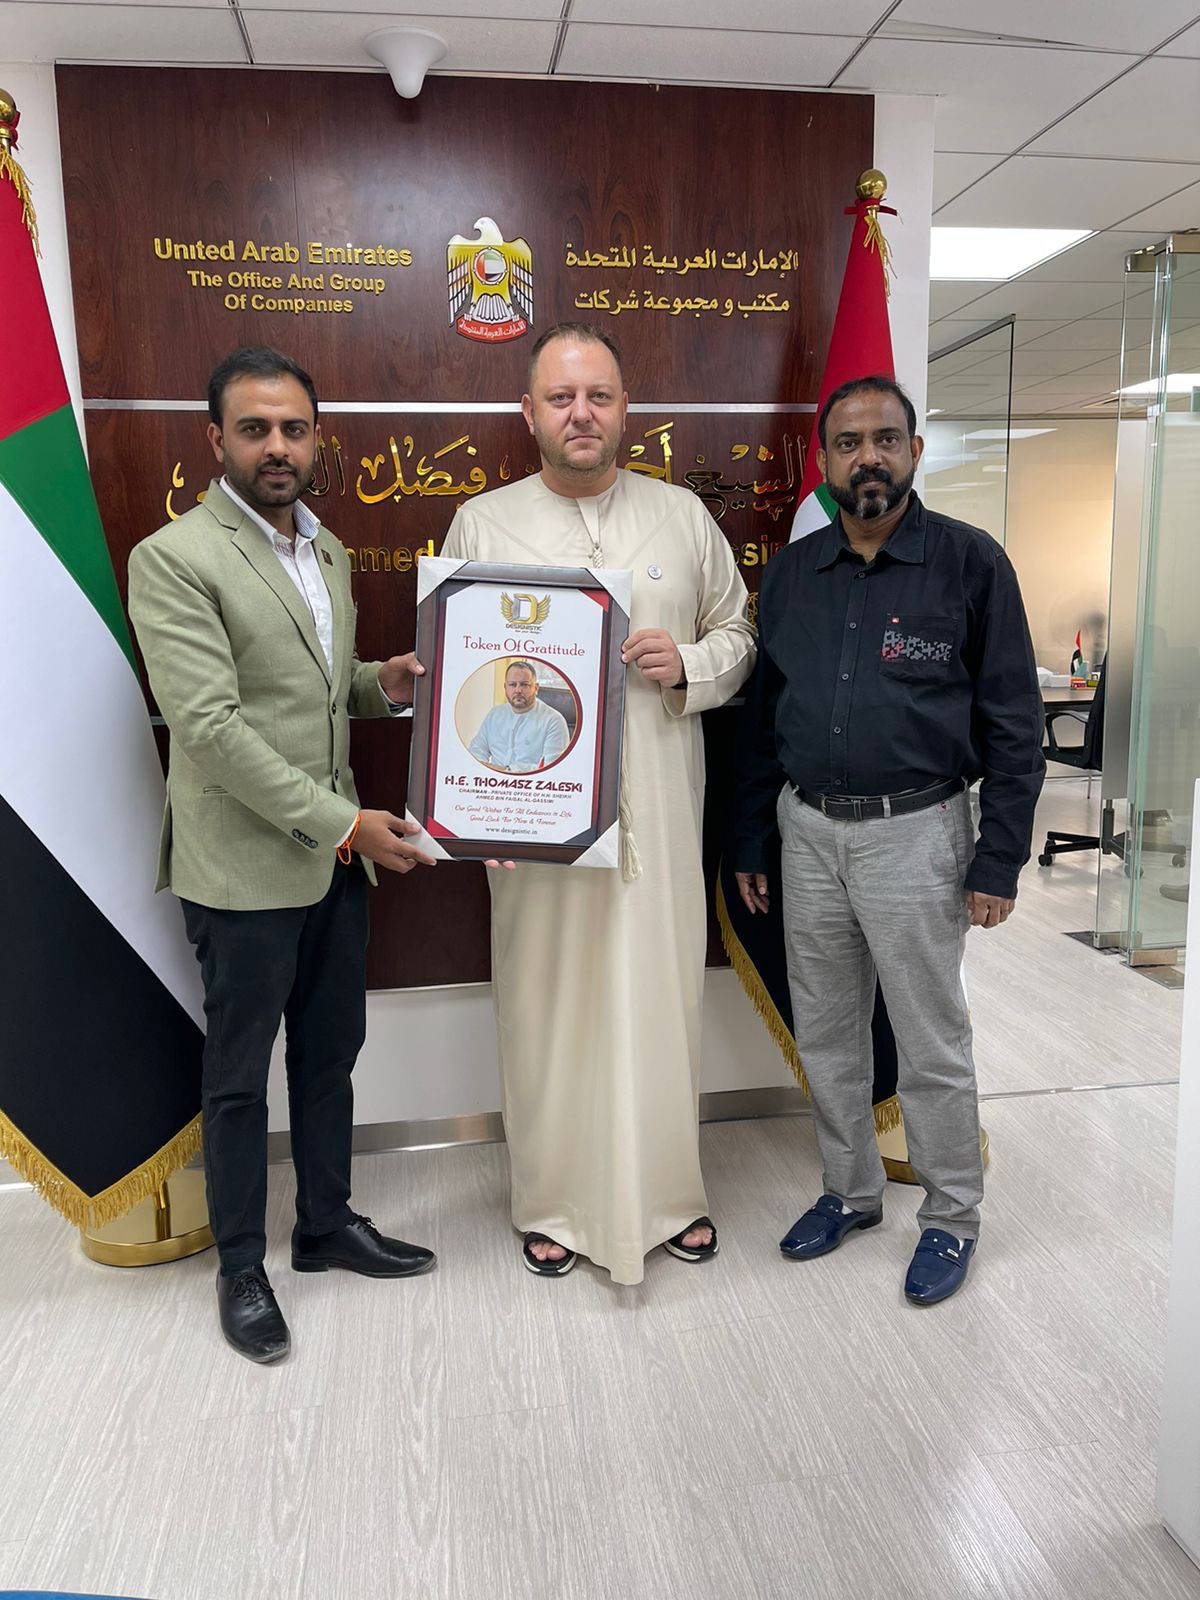 With His Excellency Tomasz Zaleski, Chairman of  the Private office of HH Shiekh Ahmed Bin Faisal Al Qassimi  at his Office in Dubai